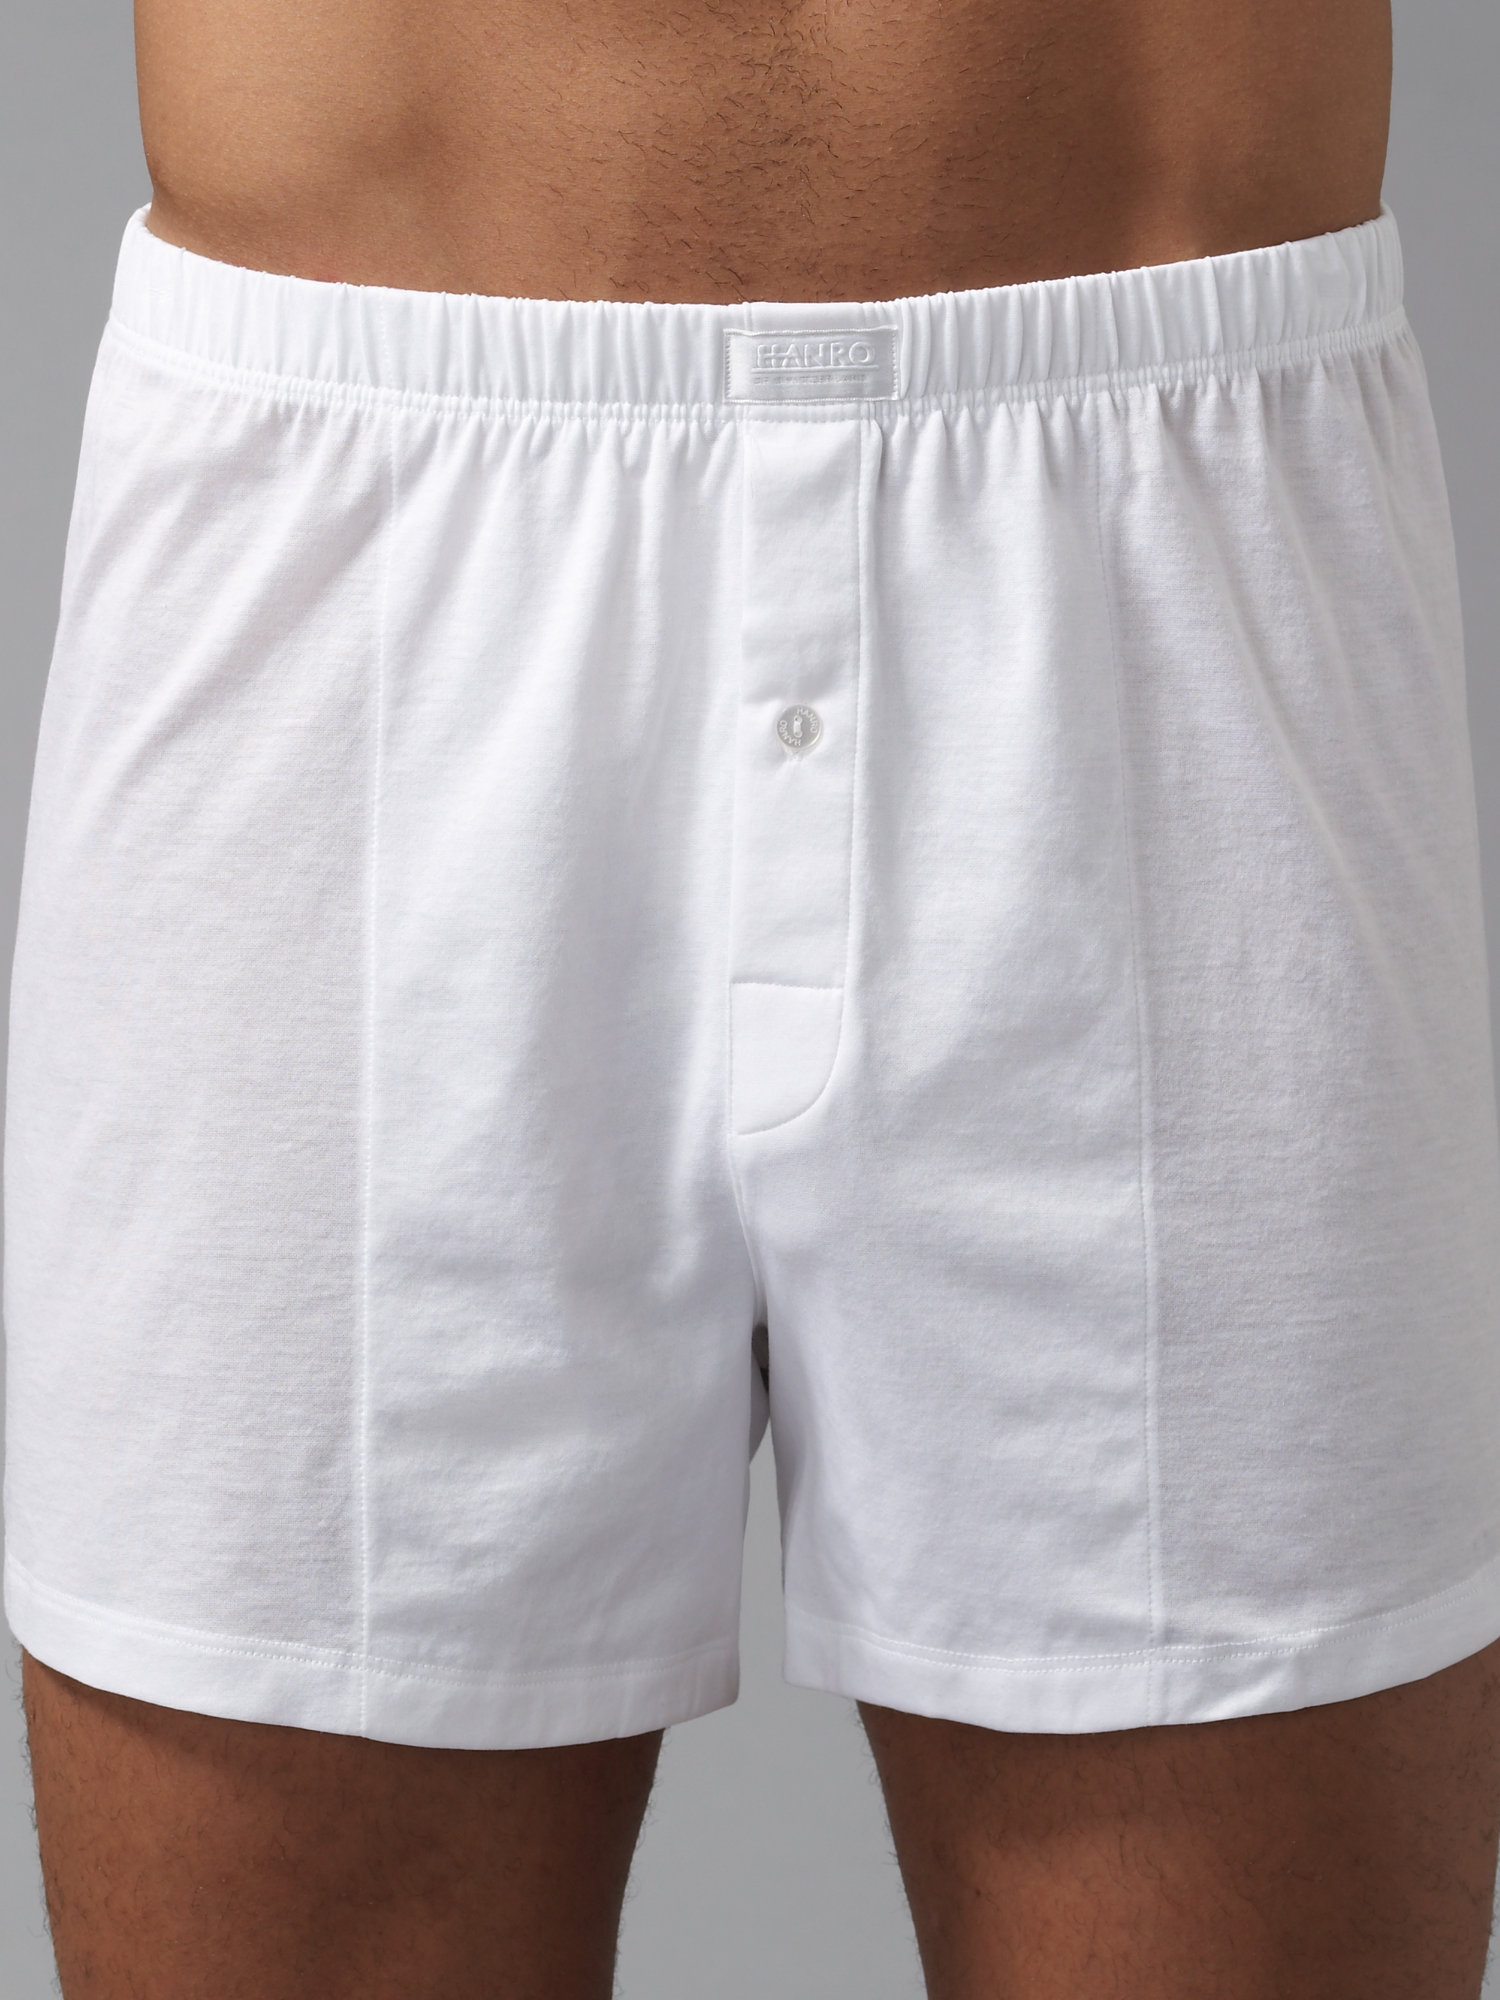 Hanro Cotton Jersey Boxers in White for Men - Lyst